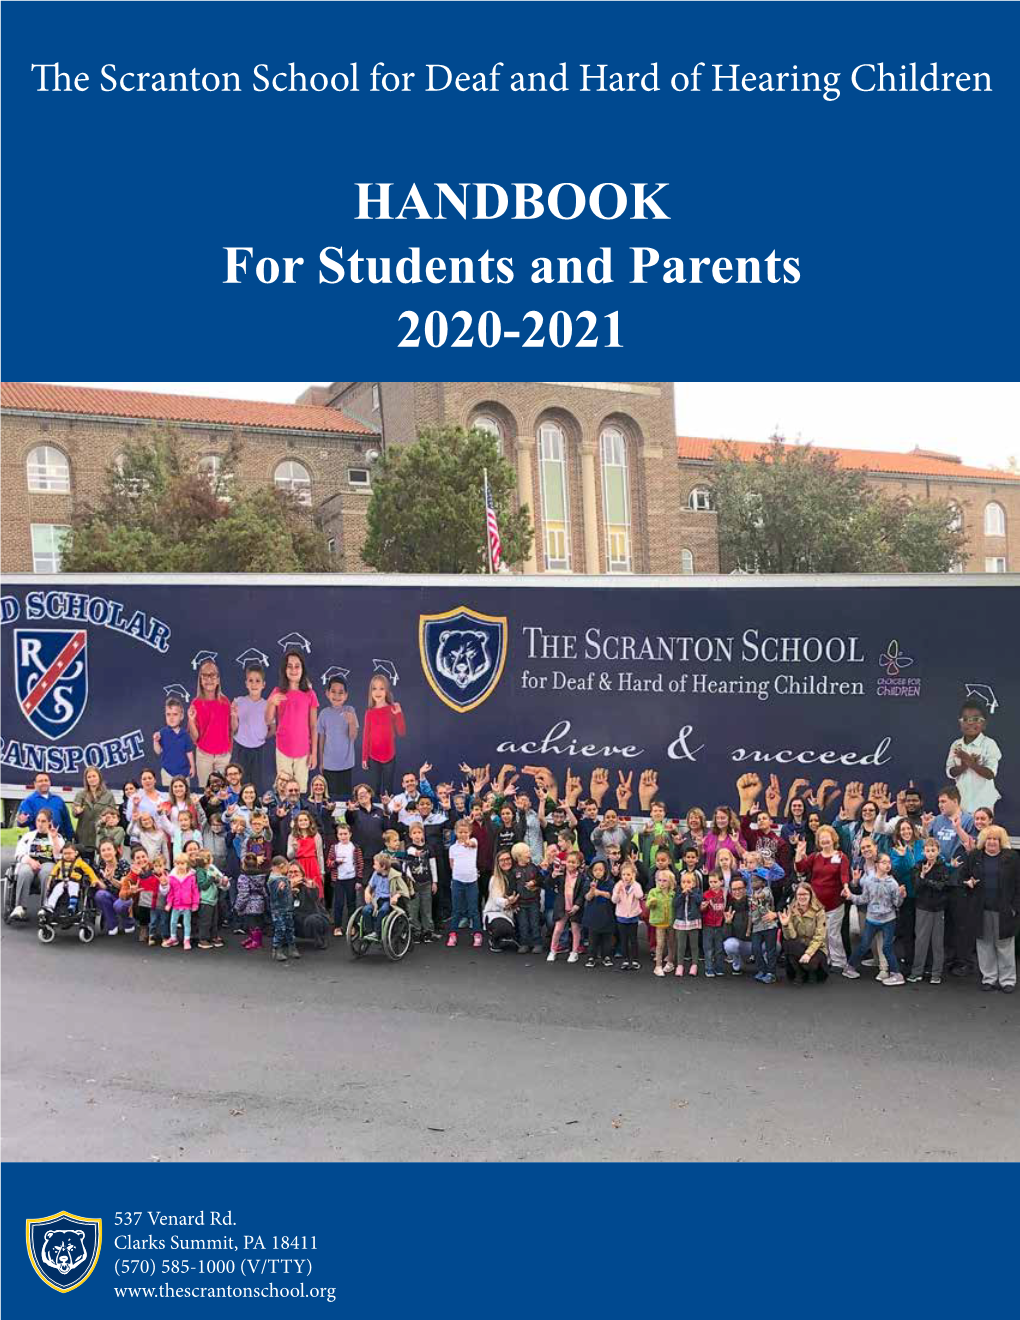 HANDBOOK for Students and Parents 2020-2021